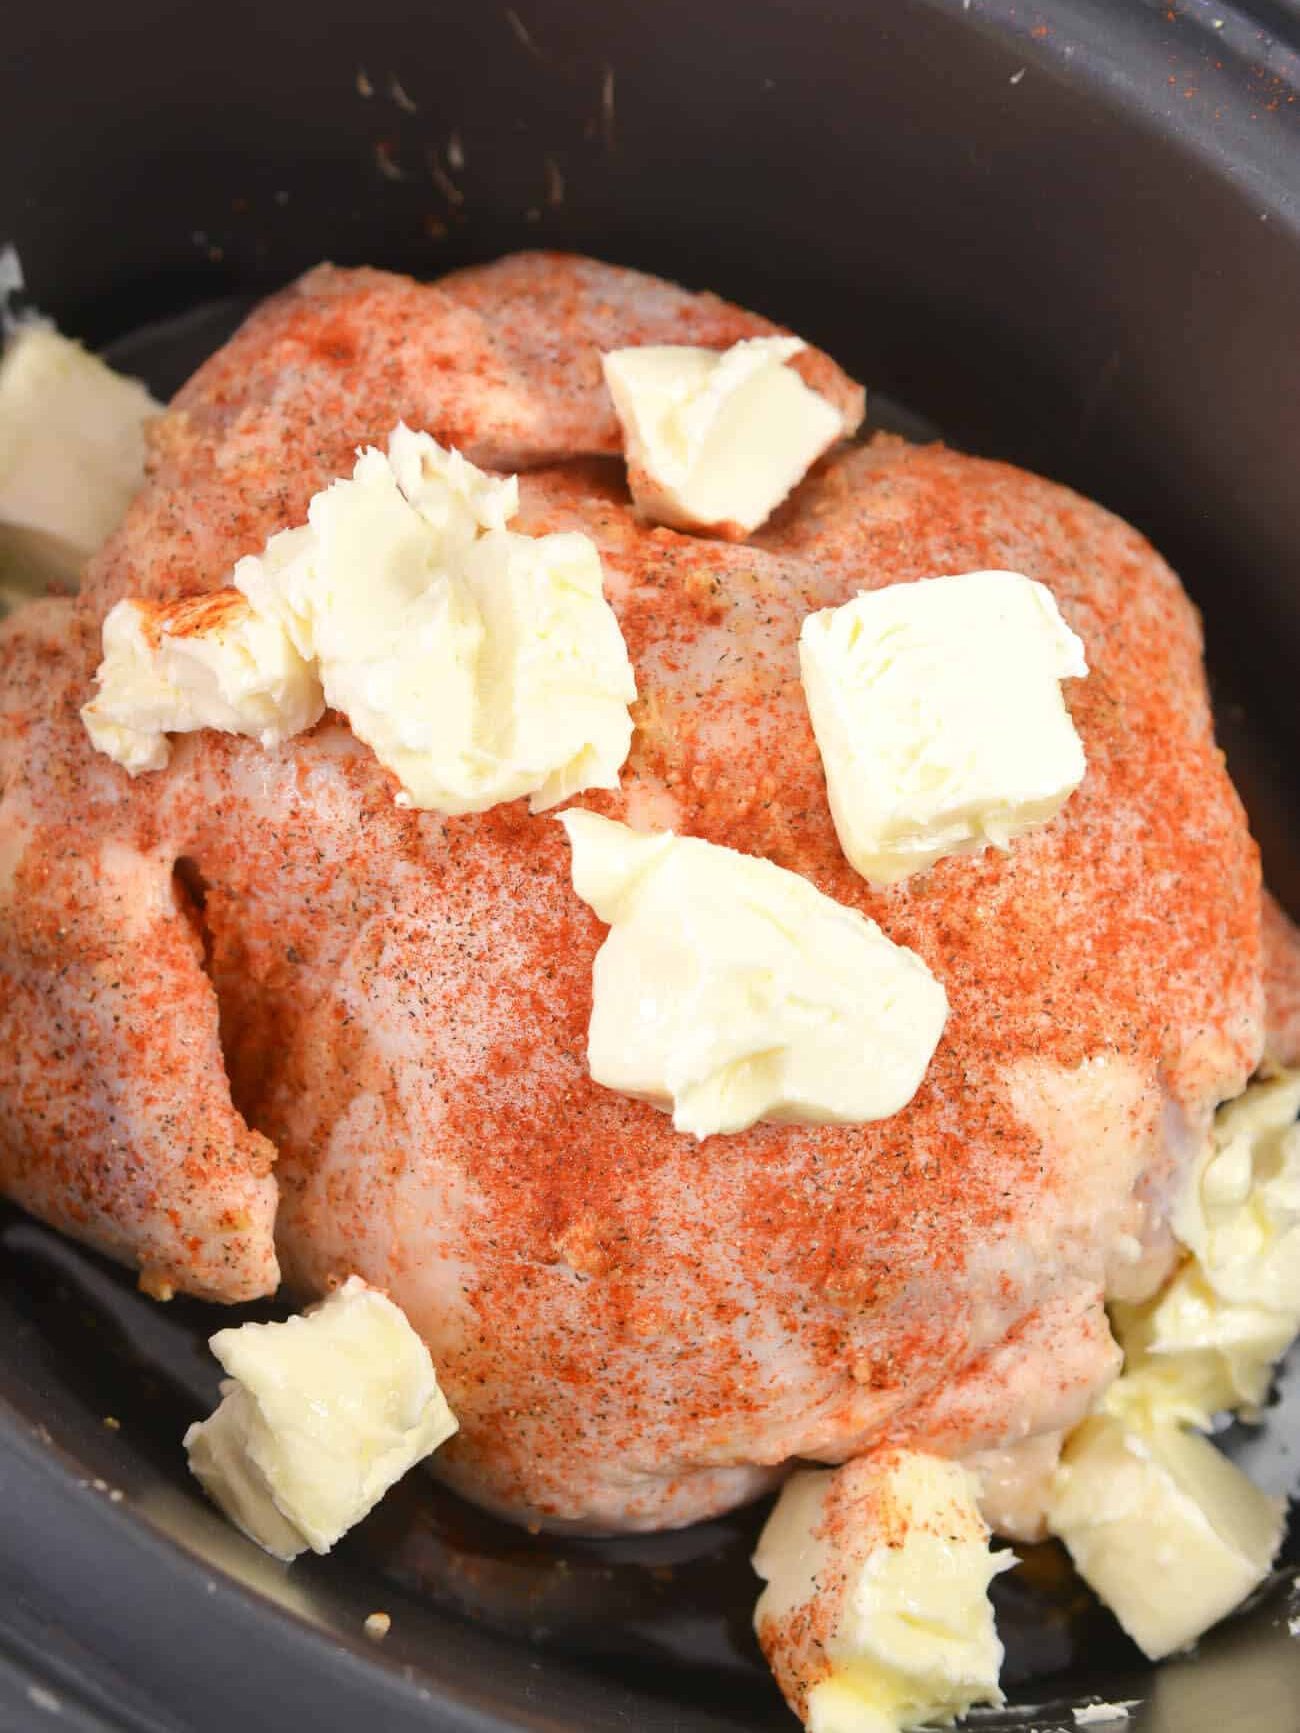 Add slices of the butter to the top of the chicken, and scatter the rest around the bottom of the chicken in the Crockpot. Cook on low for 6-8 hours.